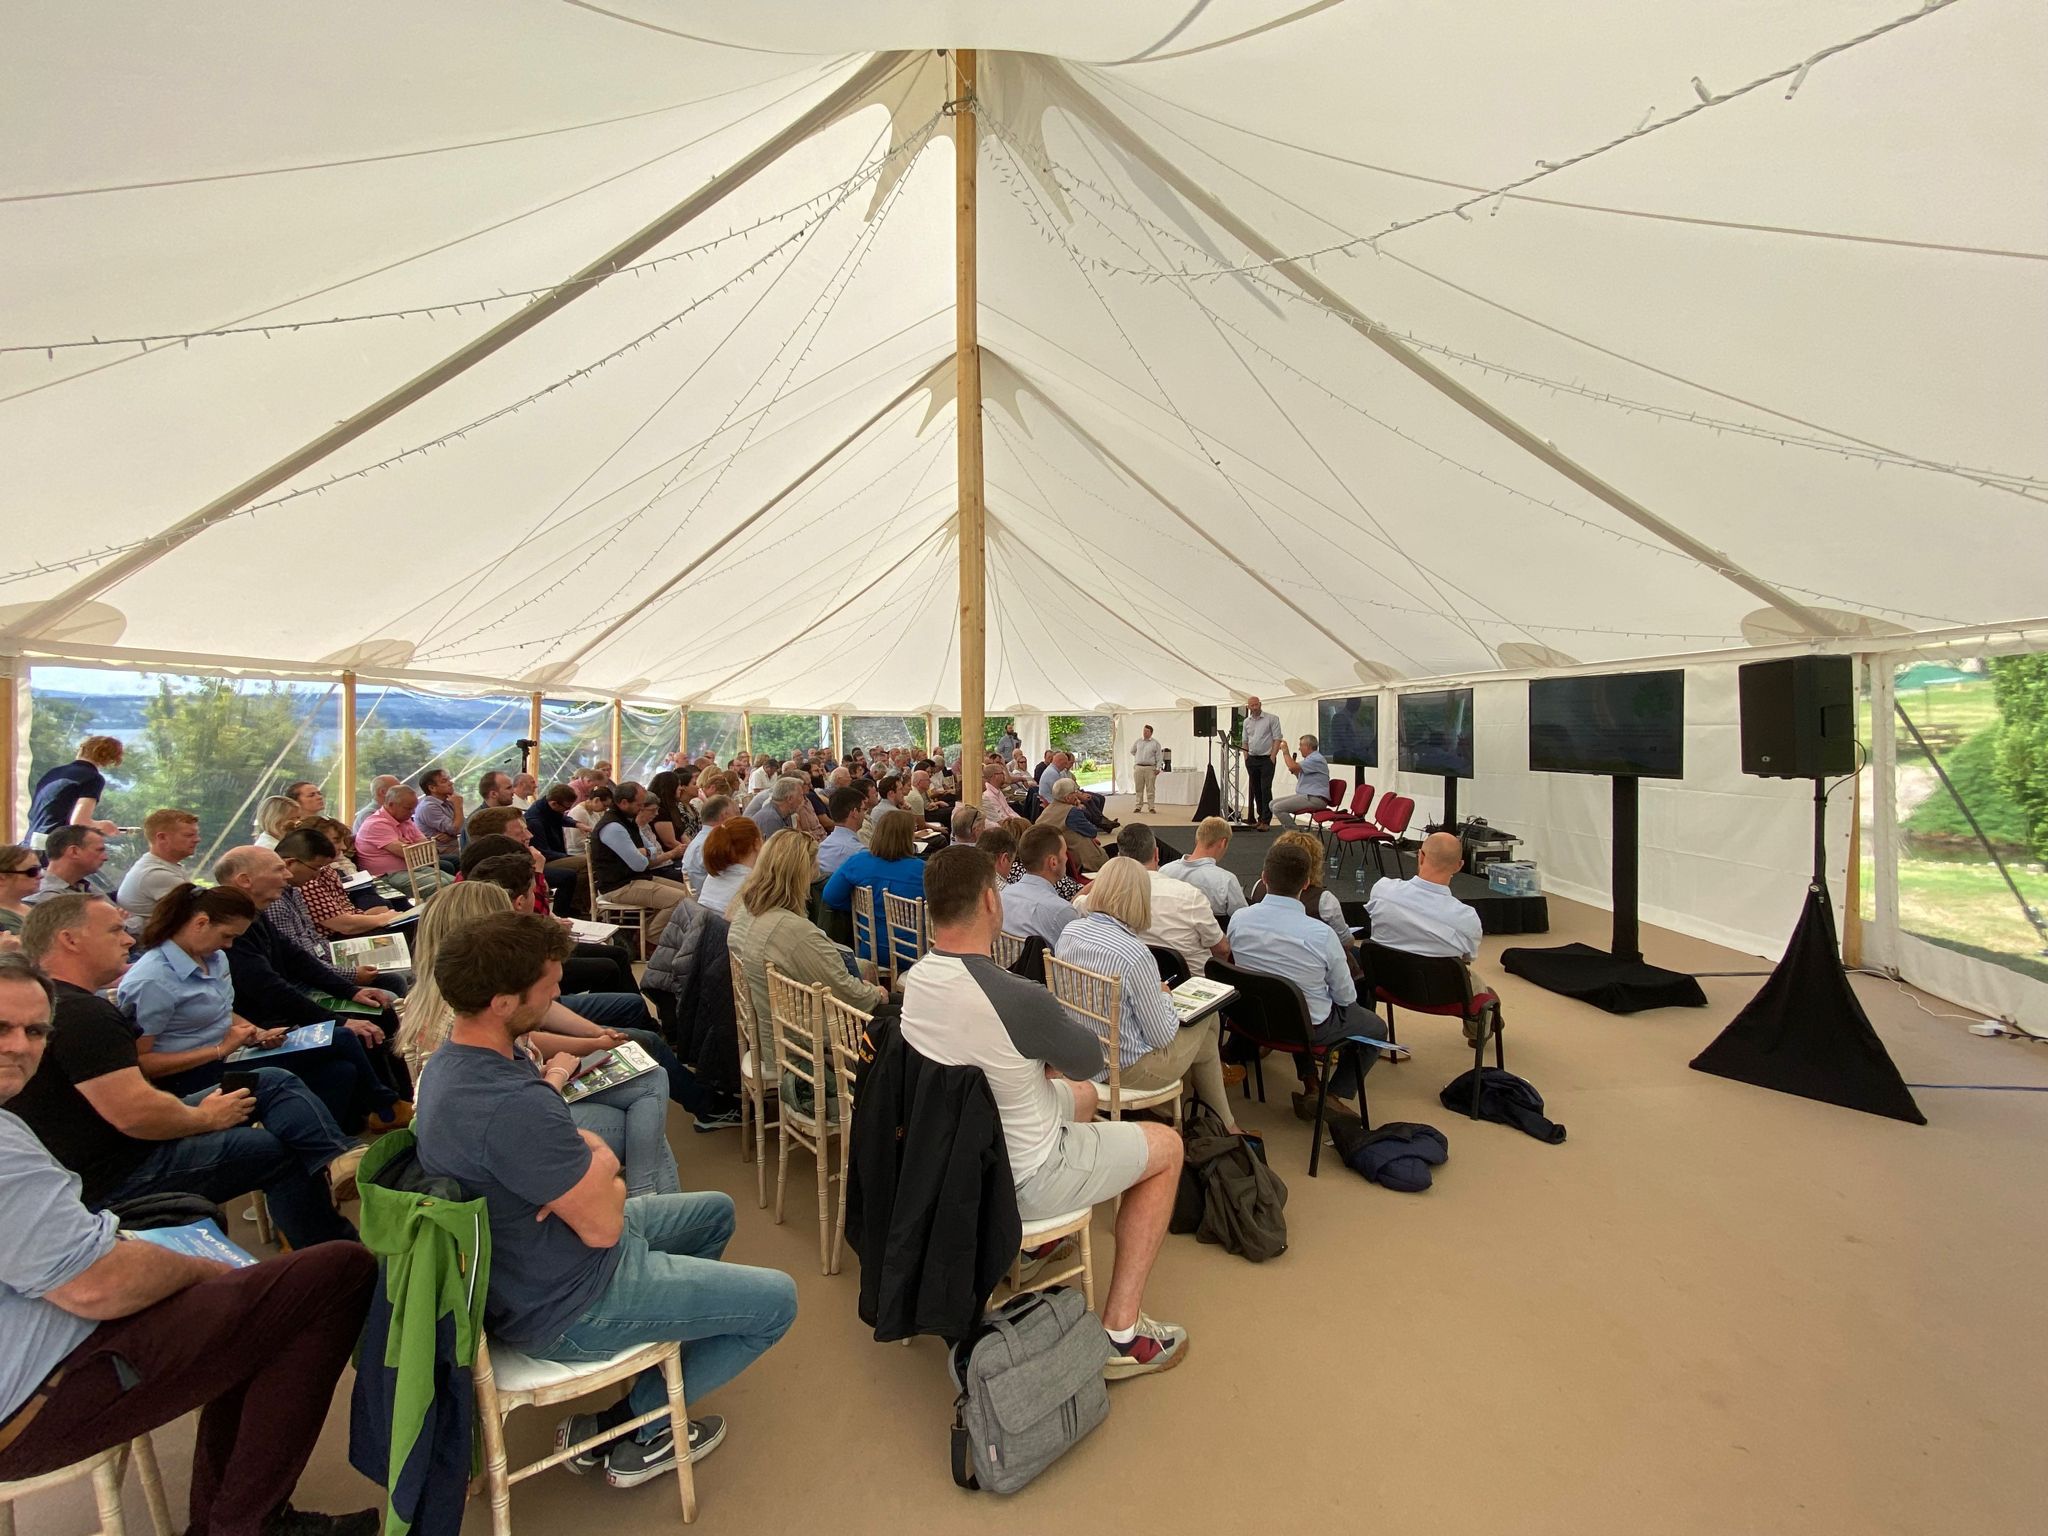 Conference held inside a traditional pole marquee